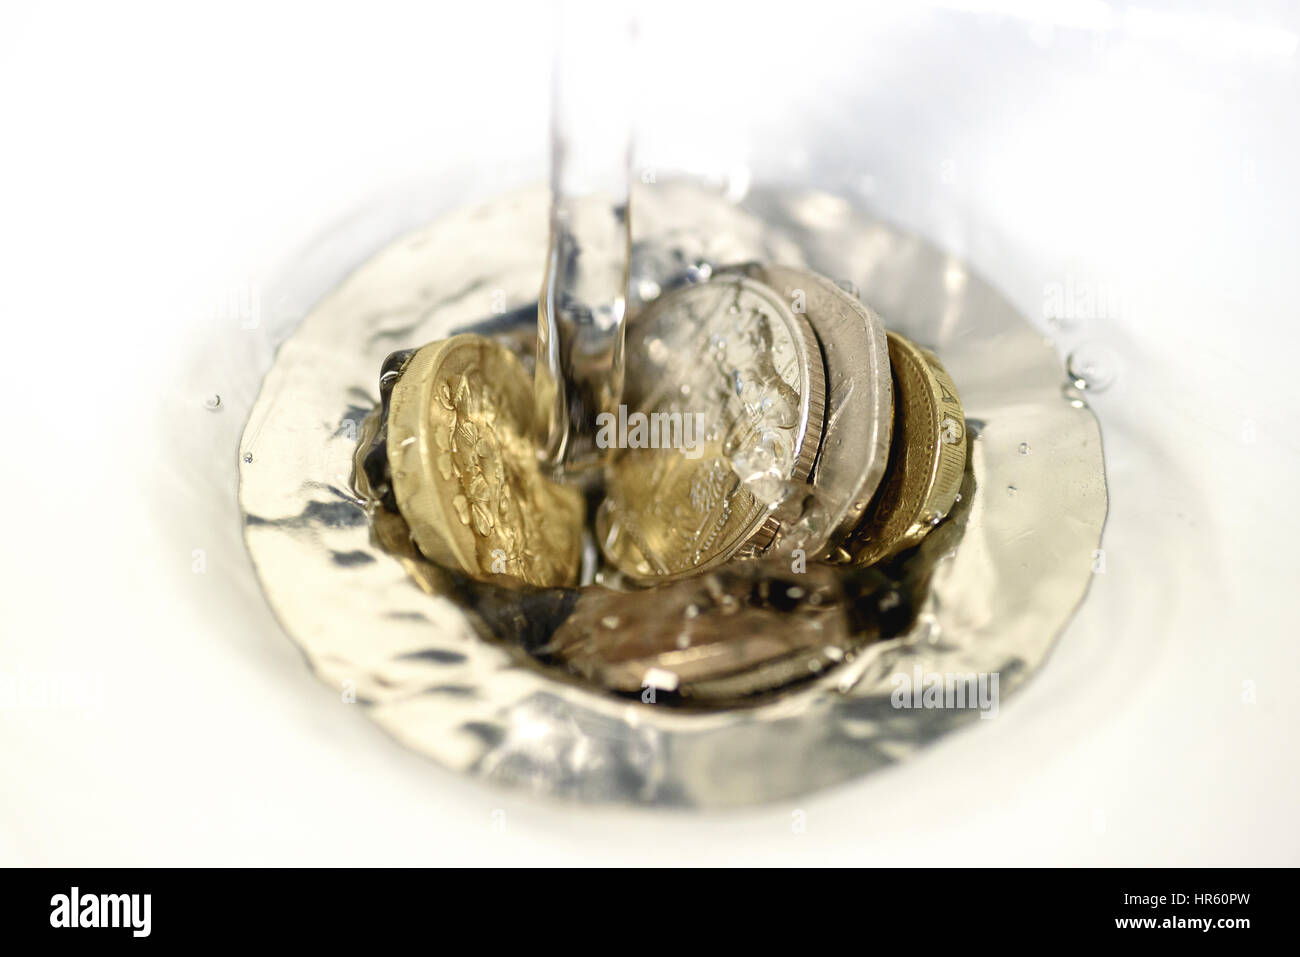 British money including a one pound coin stuck in a sink drain plughole as water flows over the coins. Stock Photo